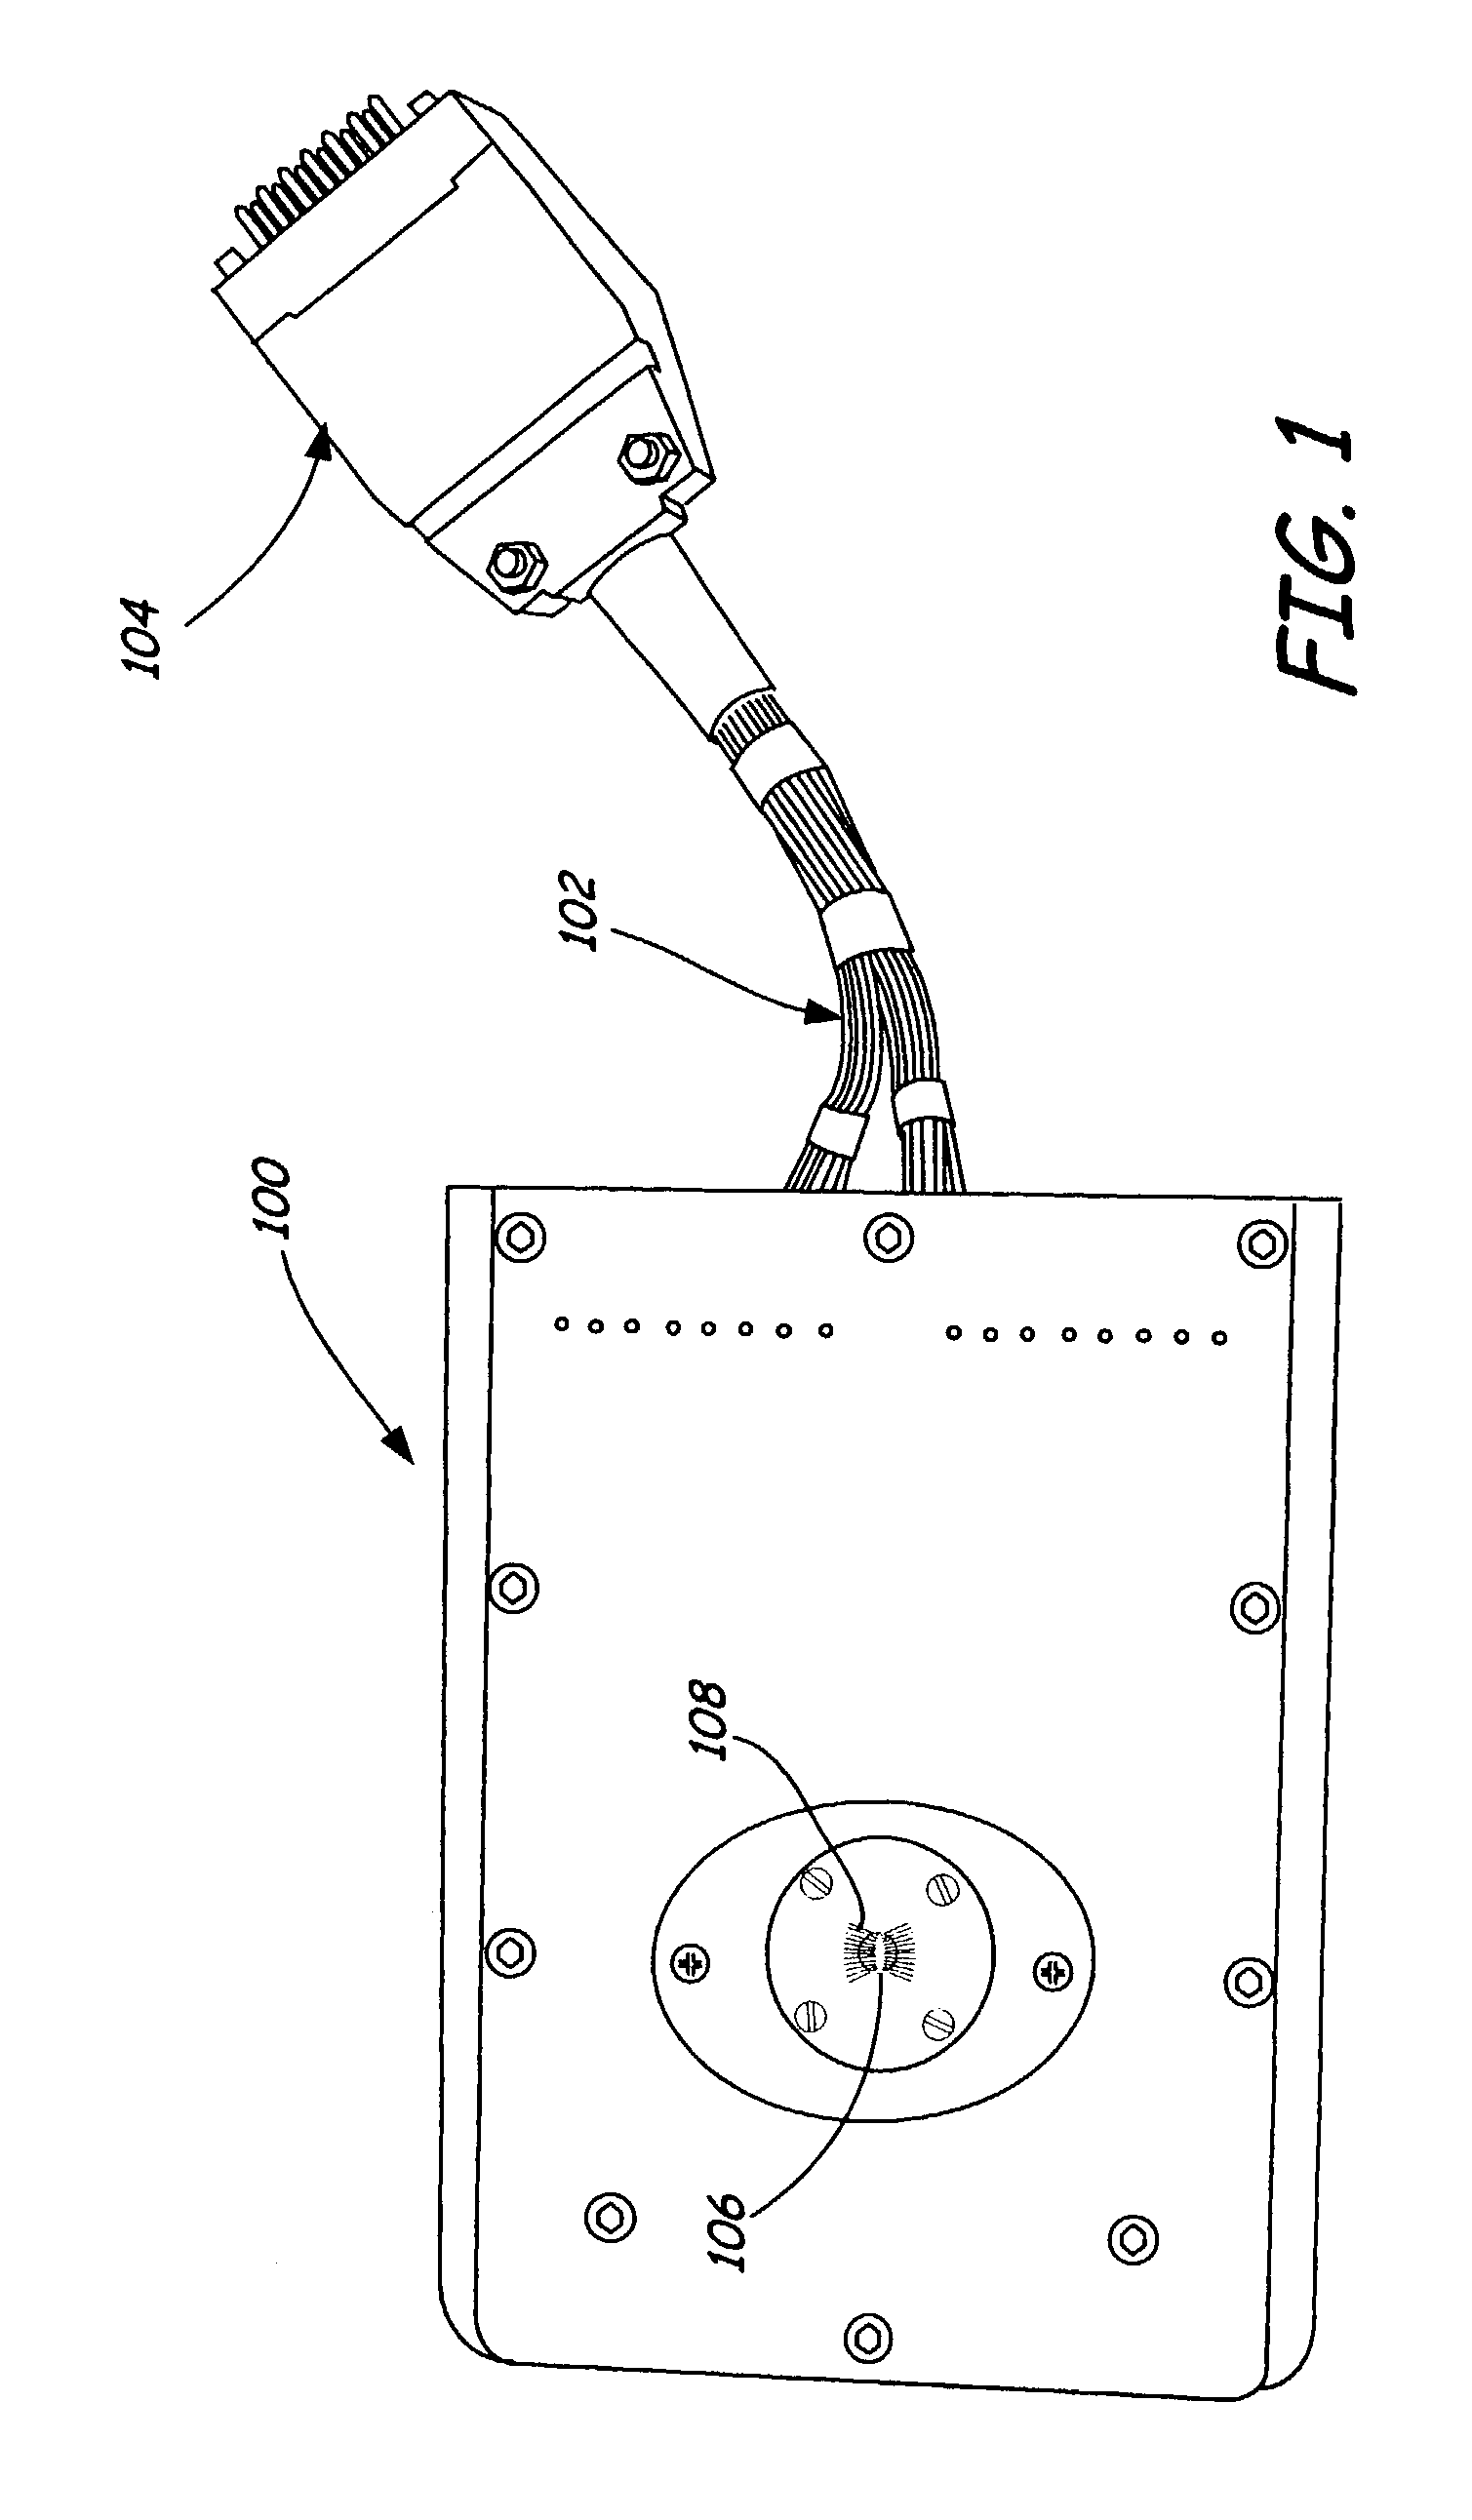 Apparatus and method for terminating probe apparatus of semiconductor wafer